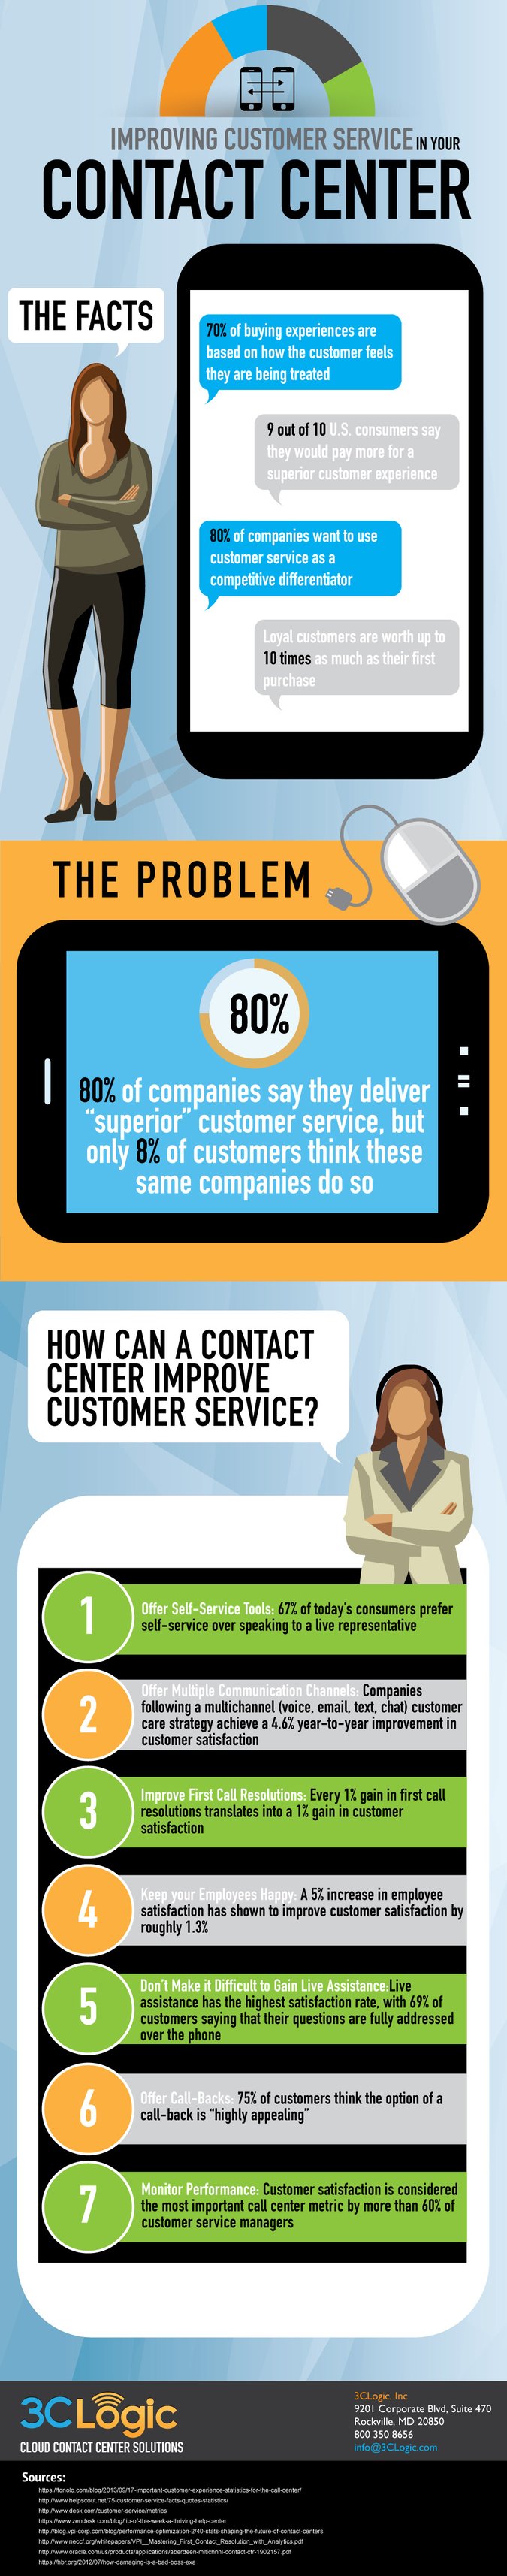 3CLogic-Infographic-Improving-Customer-Service-in-your-Call-Center